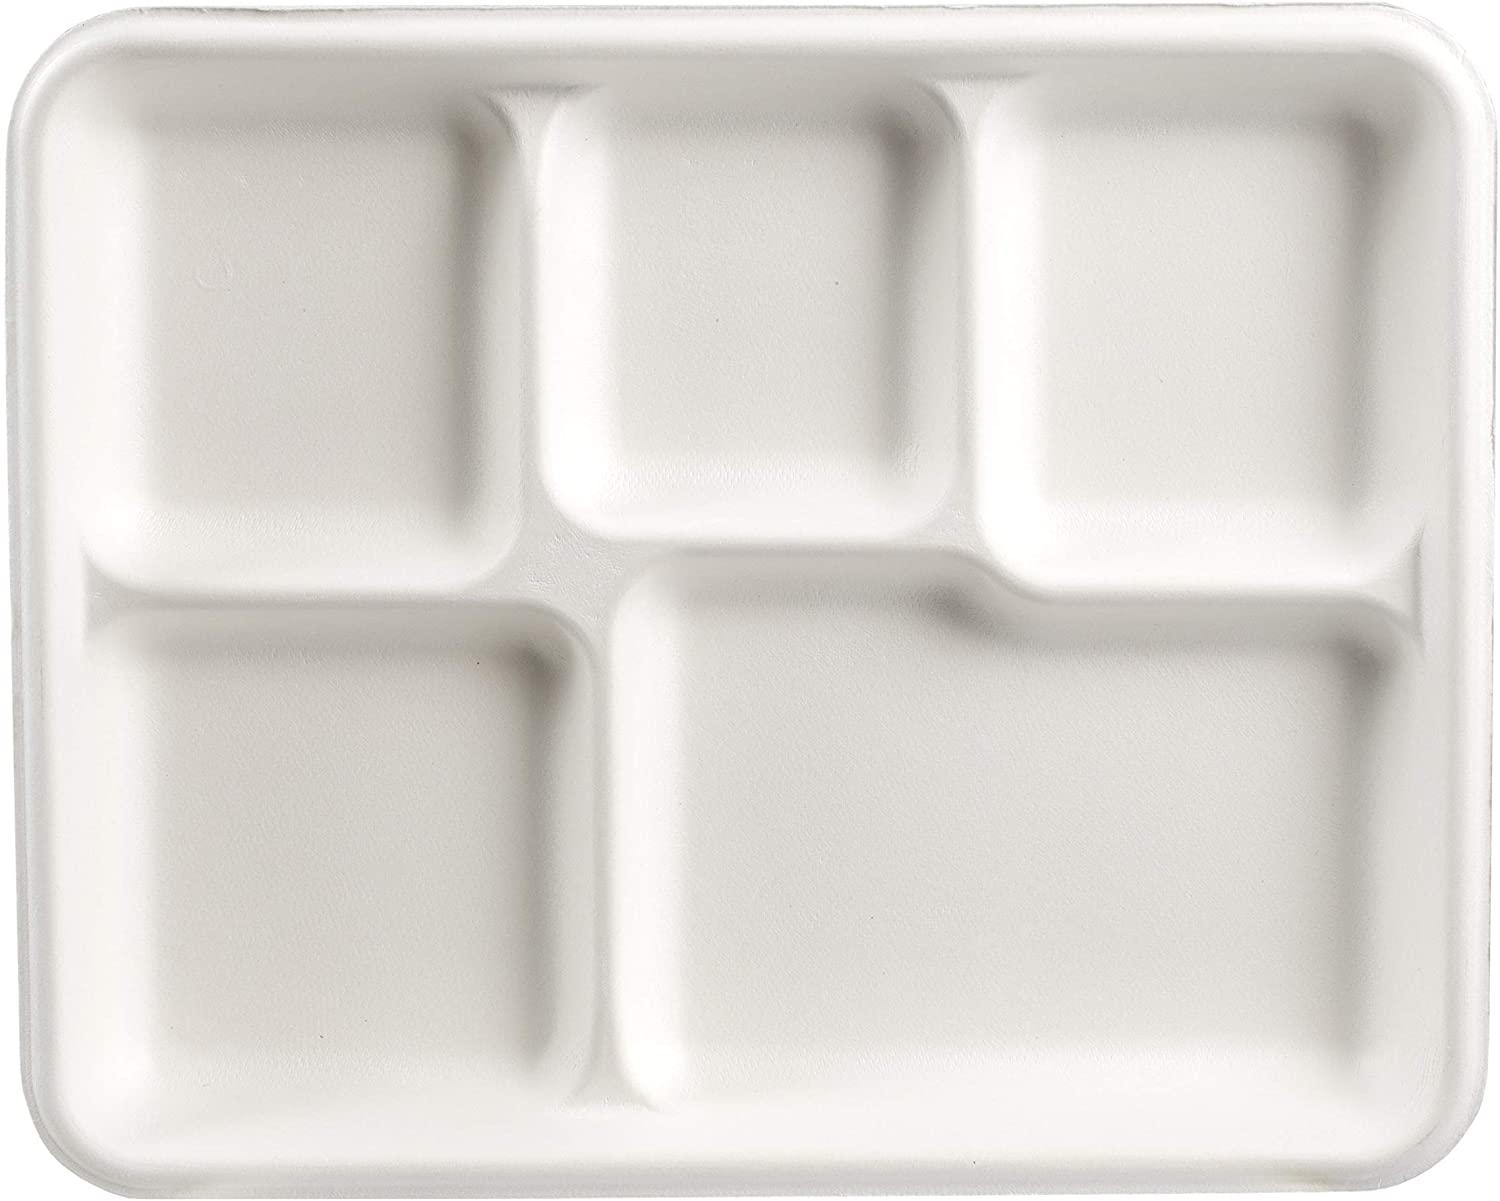 125 Pack |100% Compostable Natural Plant Fiber 5-Compartment Tray - Office Catch